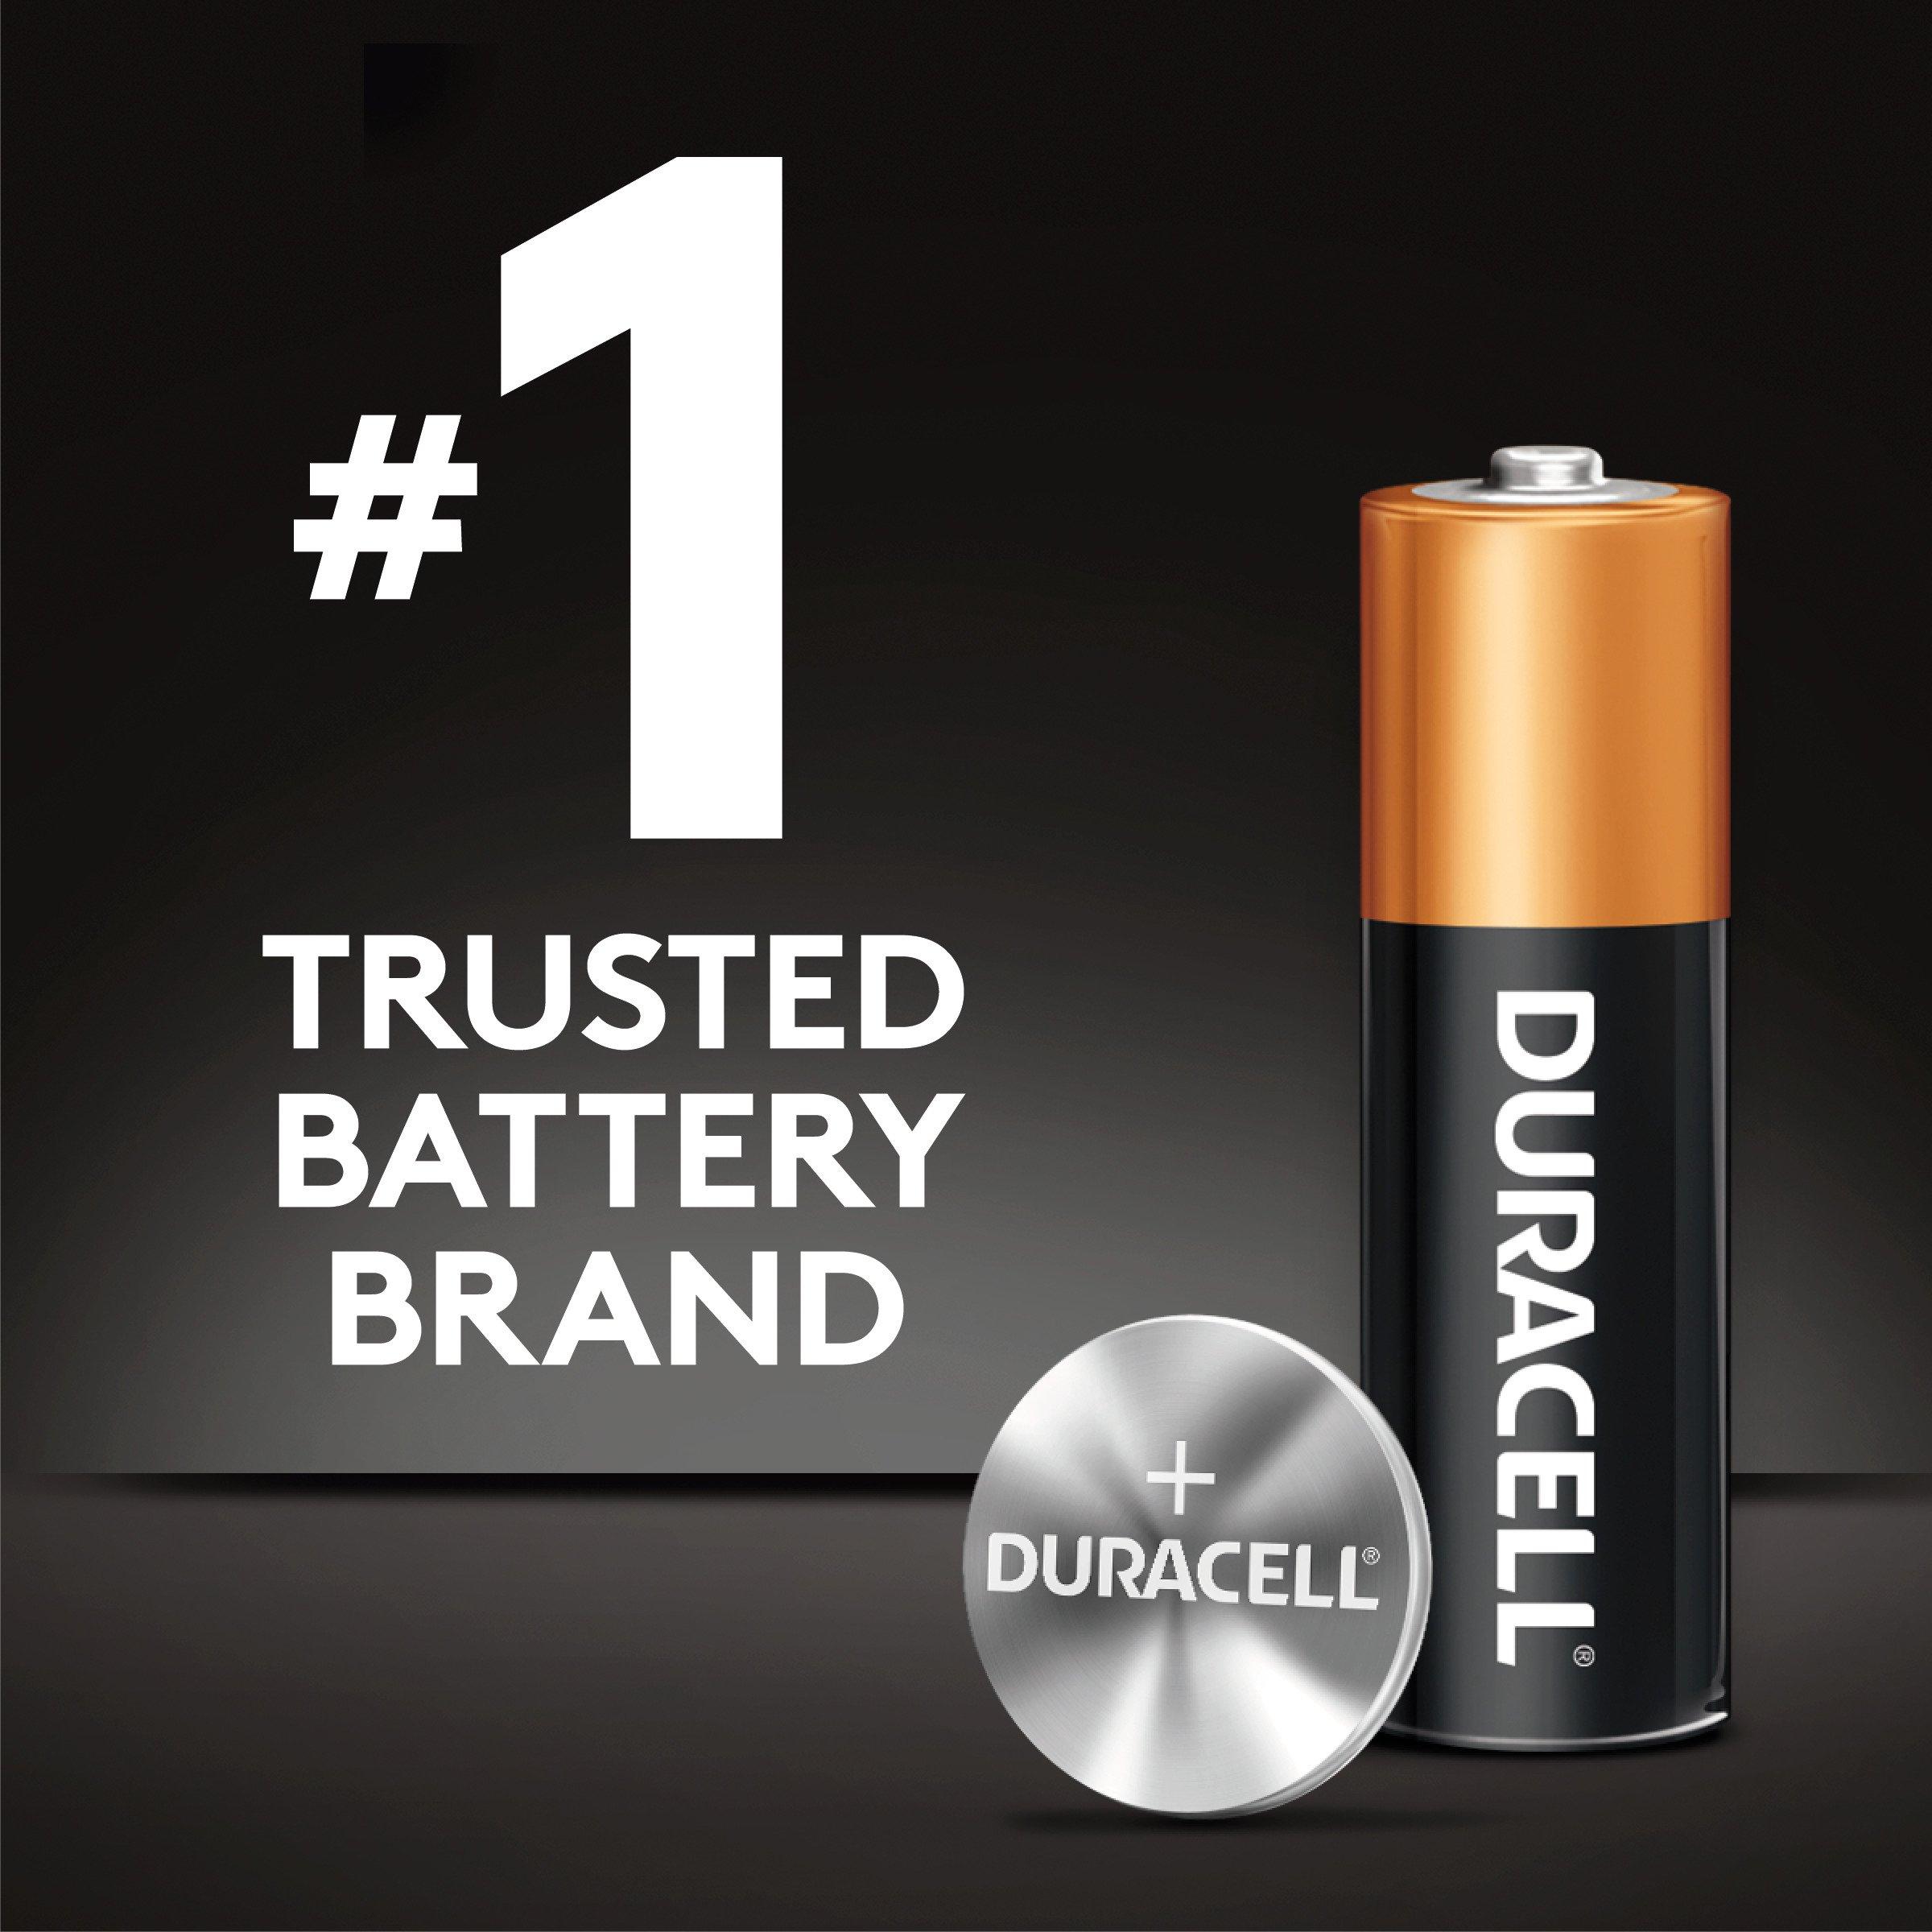 Duracell Coppertop AA Batteries 8 Pack